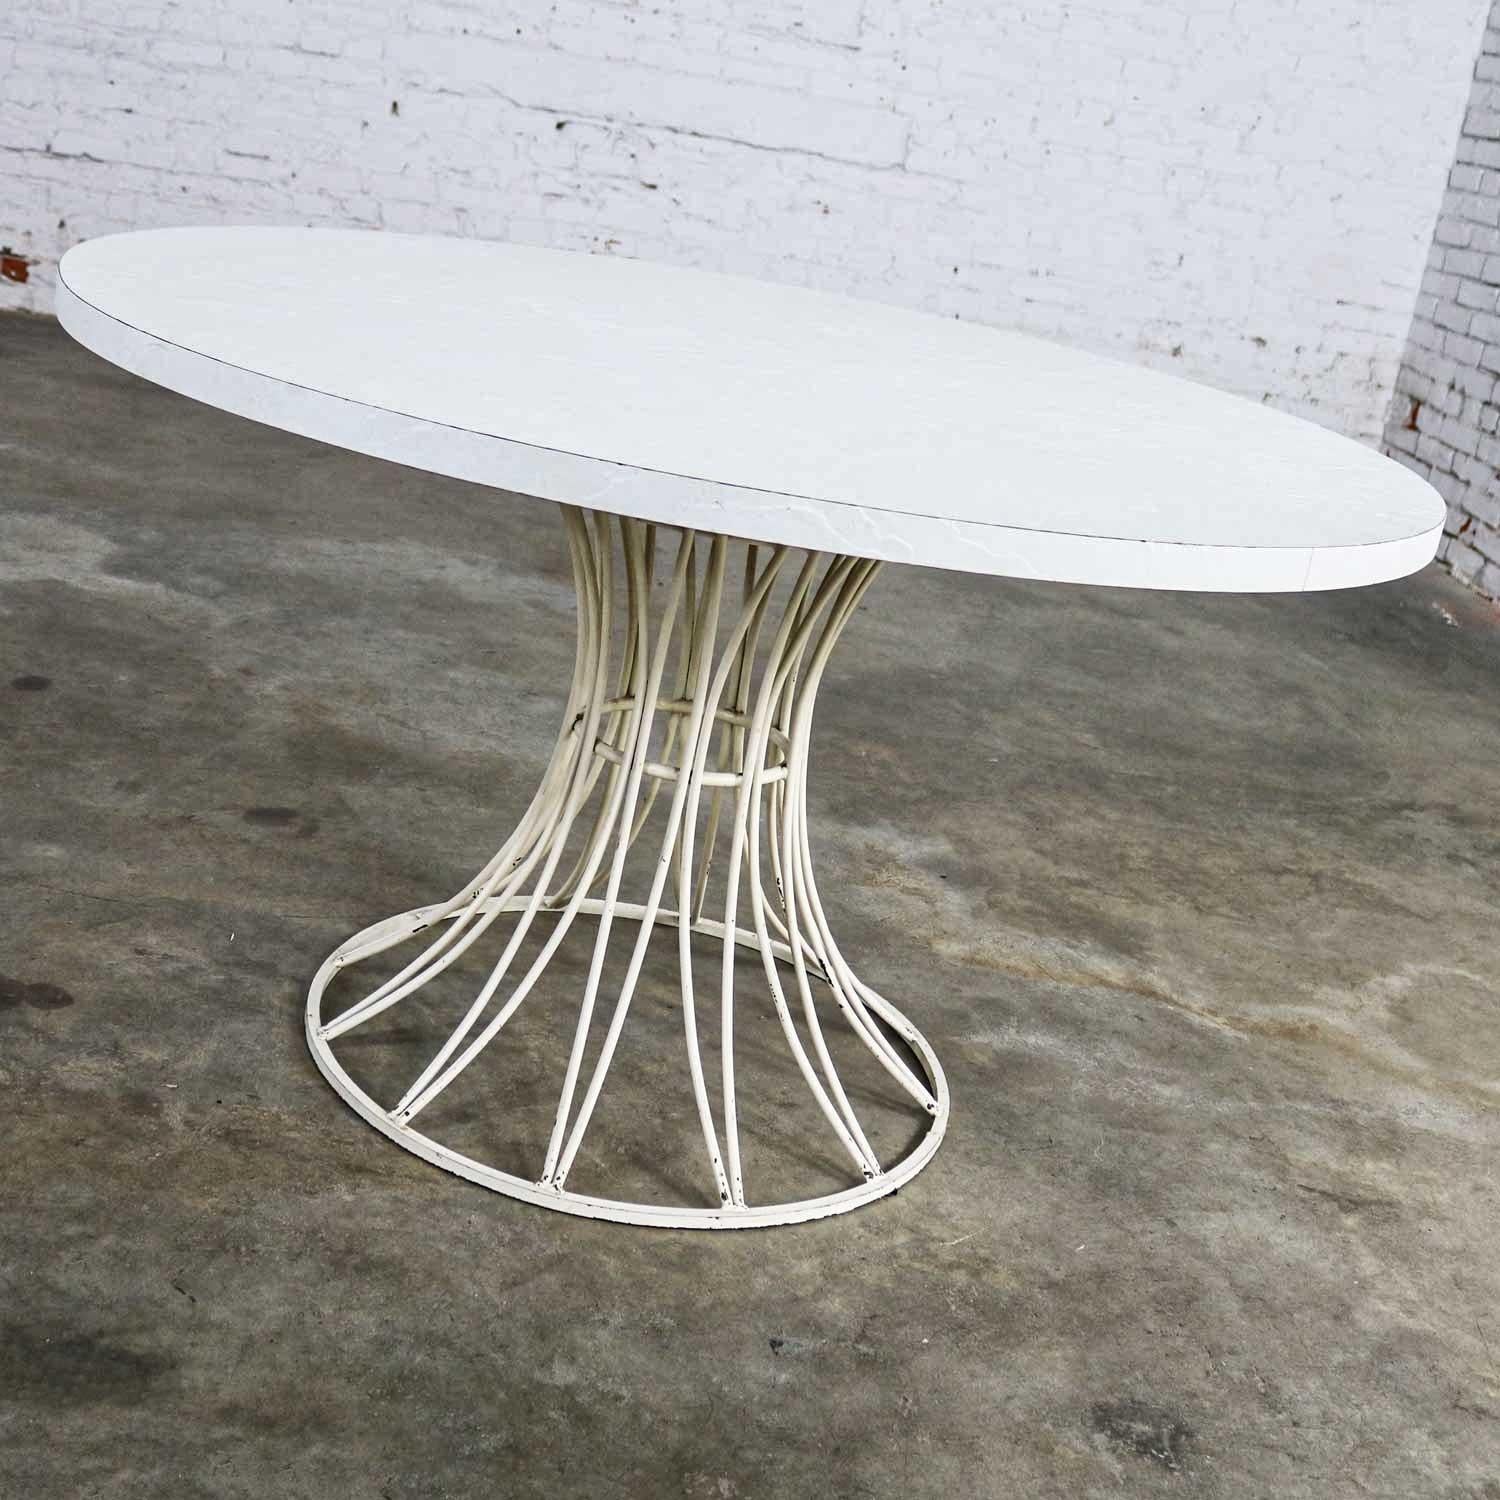 Wonderful Mid-Century Modern round white wrought iron patio table base with white slate-like textured laminate top by Max Stout for Blacksmith Shop Collection. Beautiful condition, keeping in mind that this is vintage and not new so will have signs